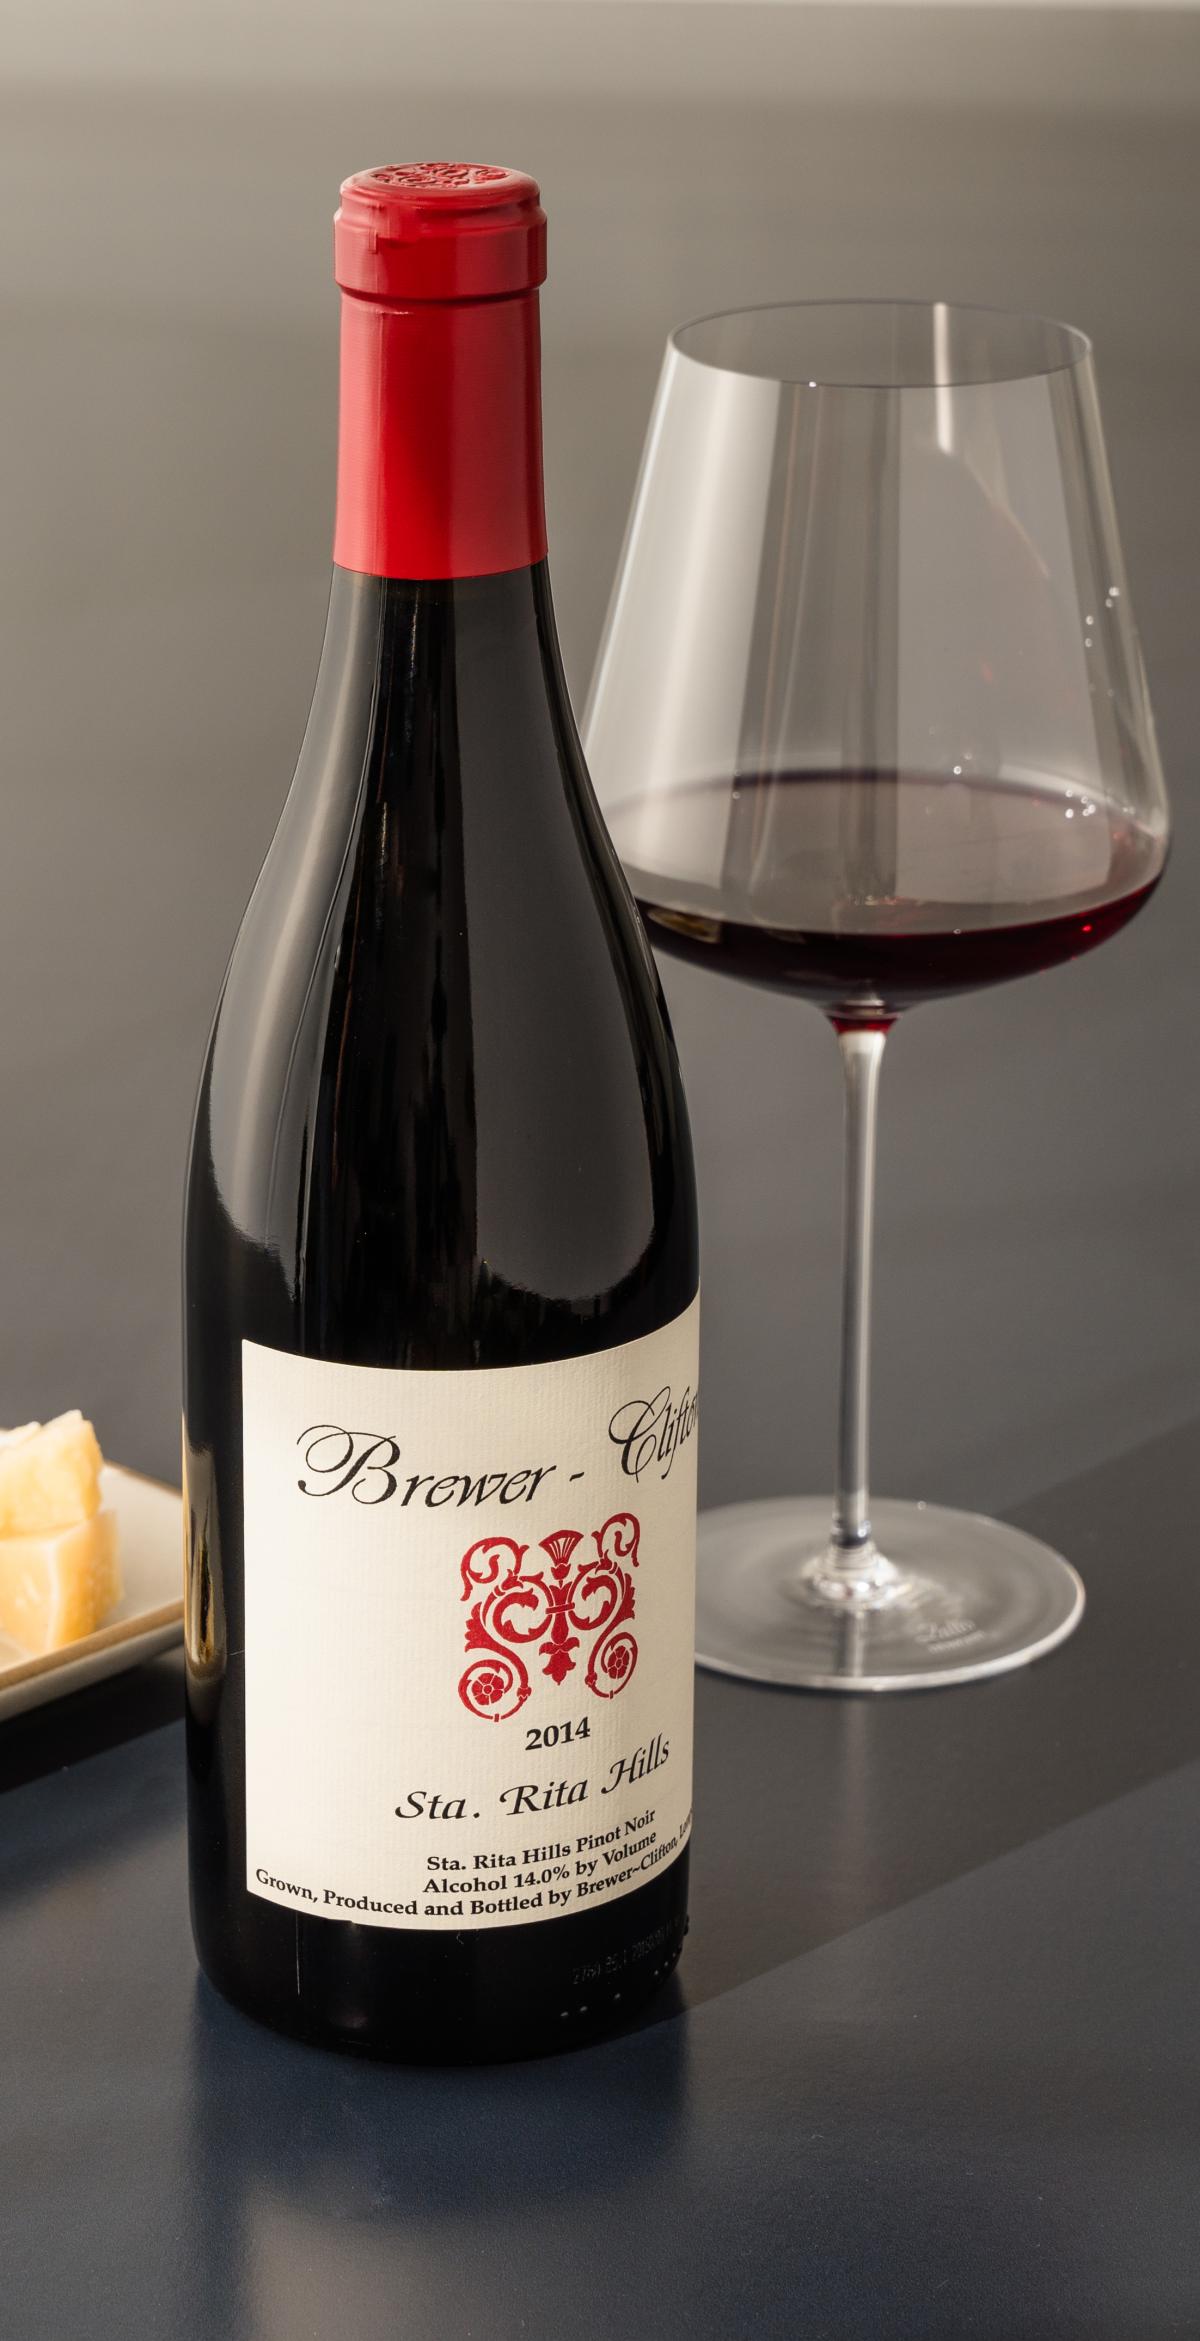 Pinot Noir red wine bottle, wine glass and cheese